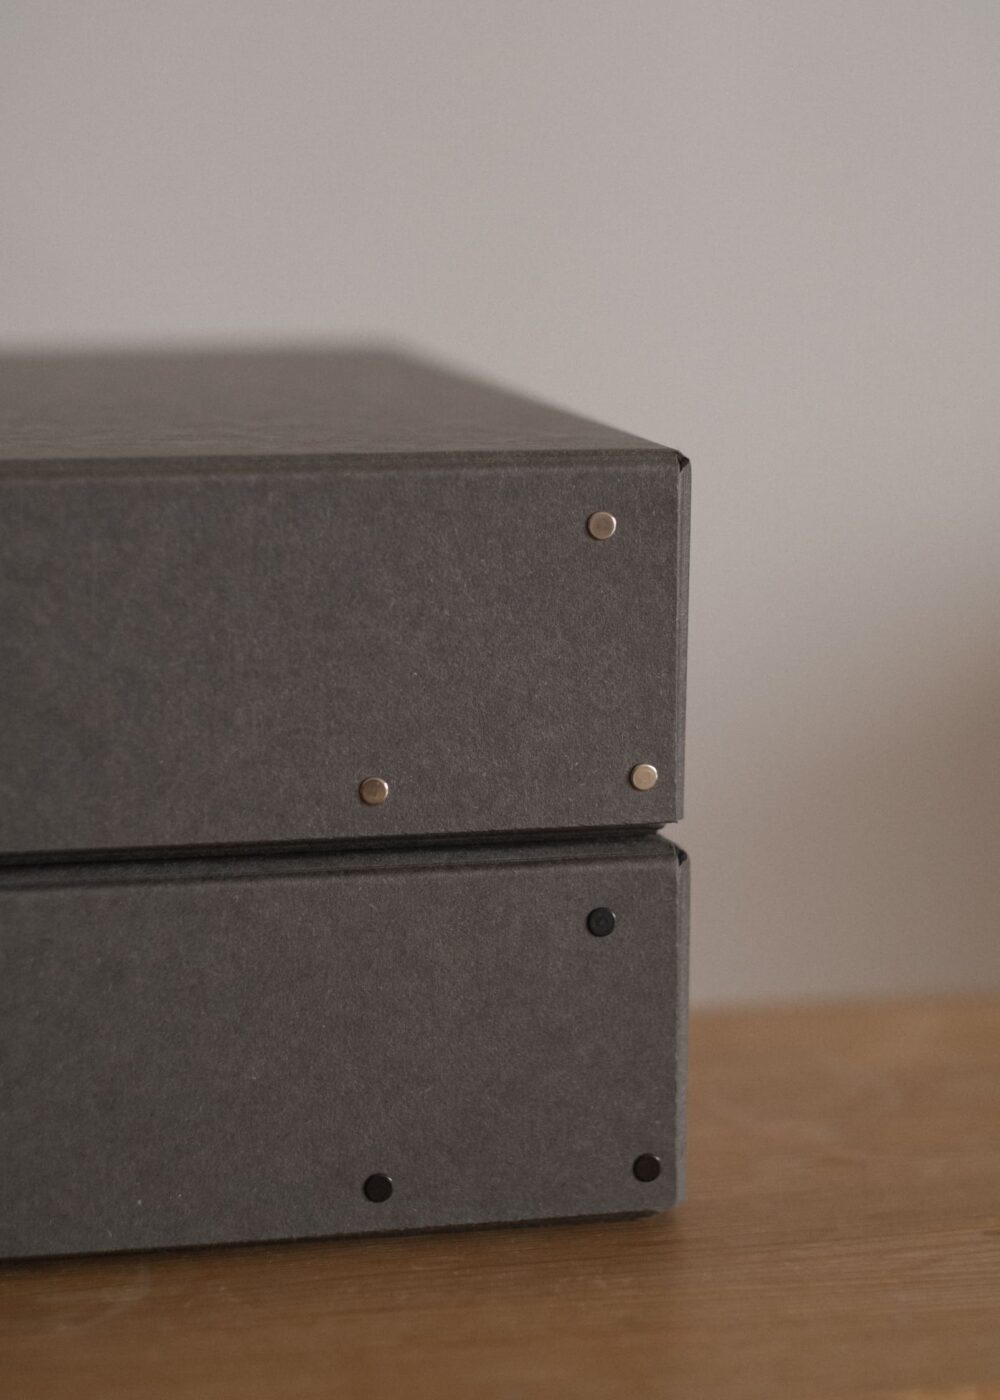 Archival storage box “Rivet Box” Charcoal Gray / Nickel Silver and Black - FROME